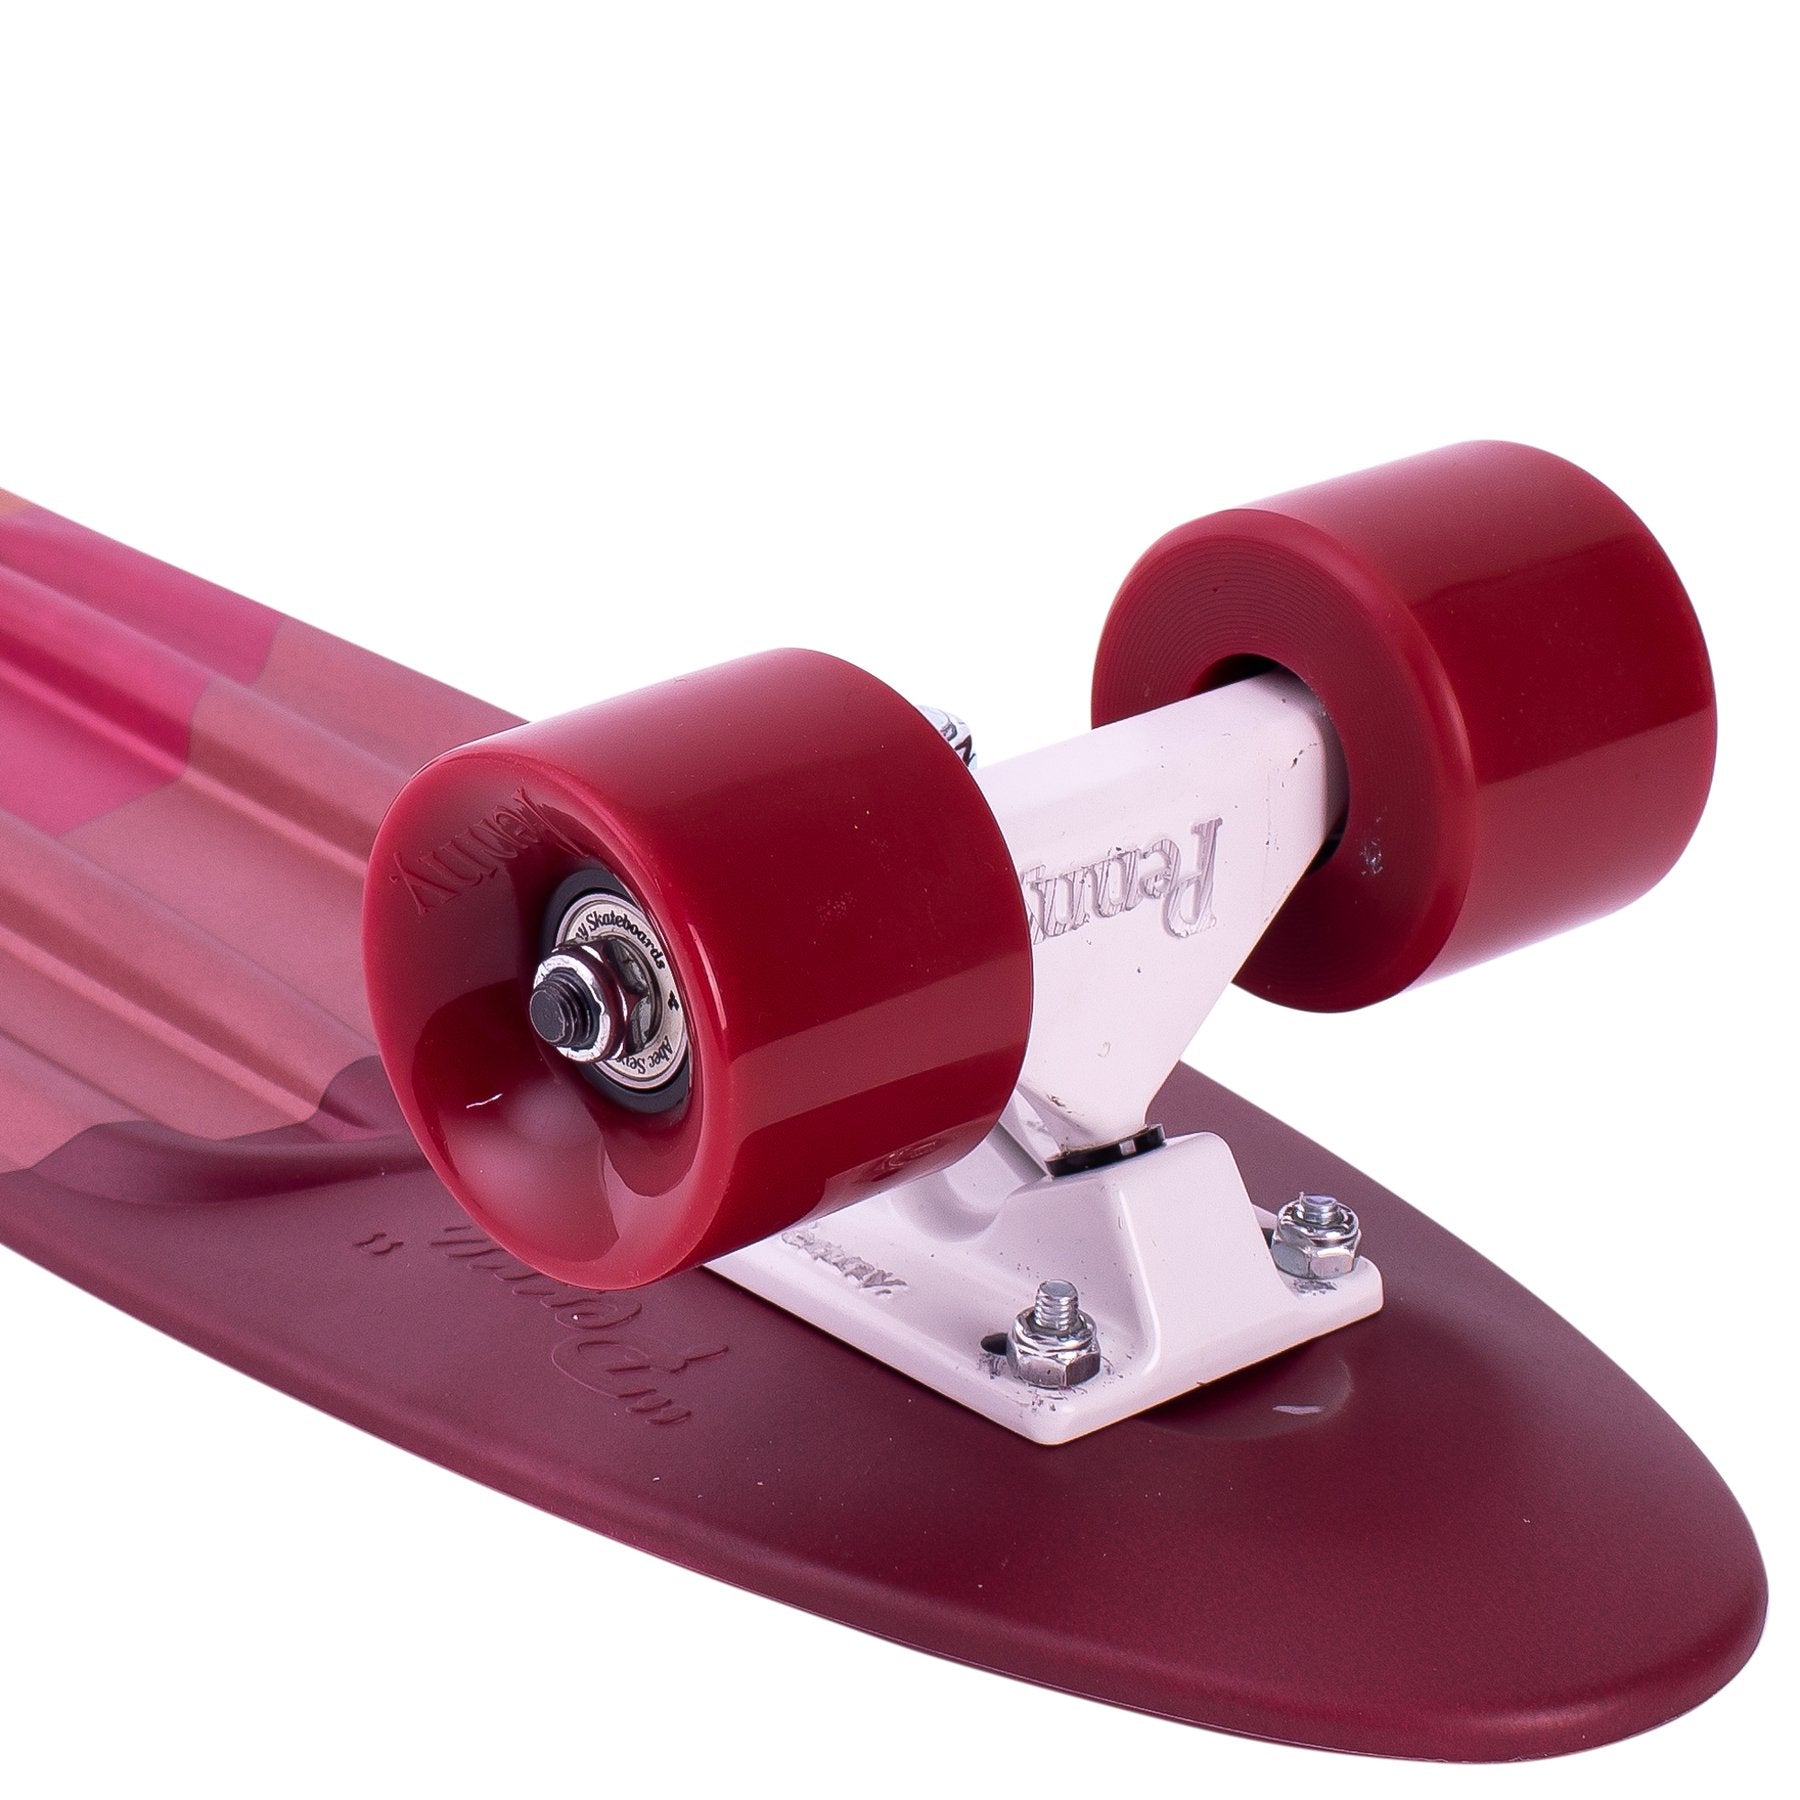 PENNY COMPLETE RISE 22in - The Drive Skateshop